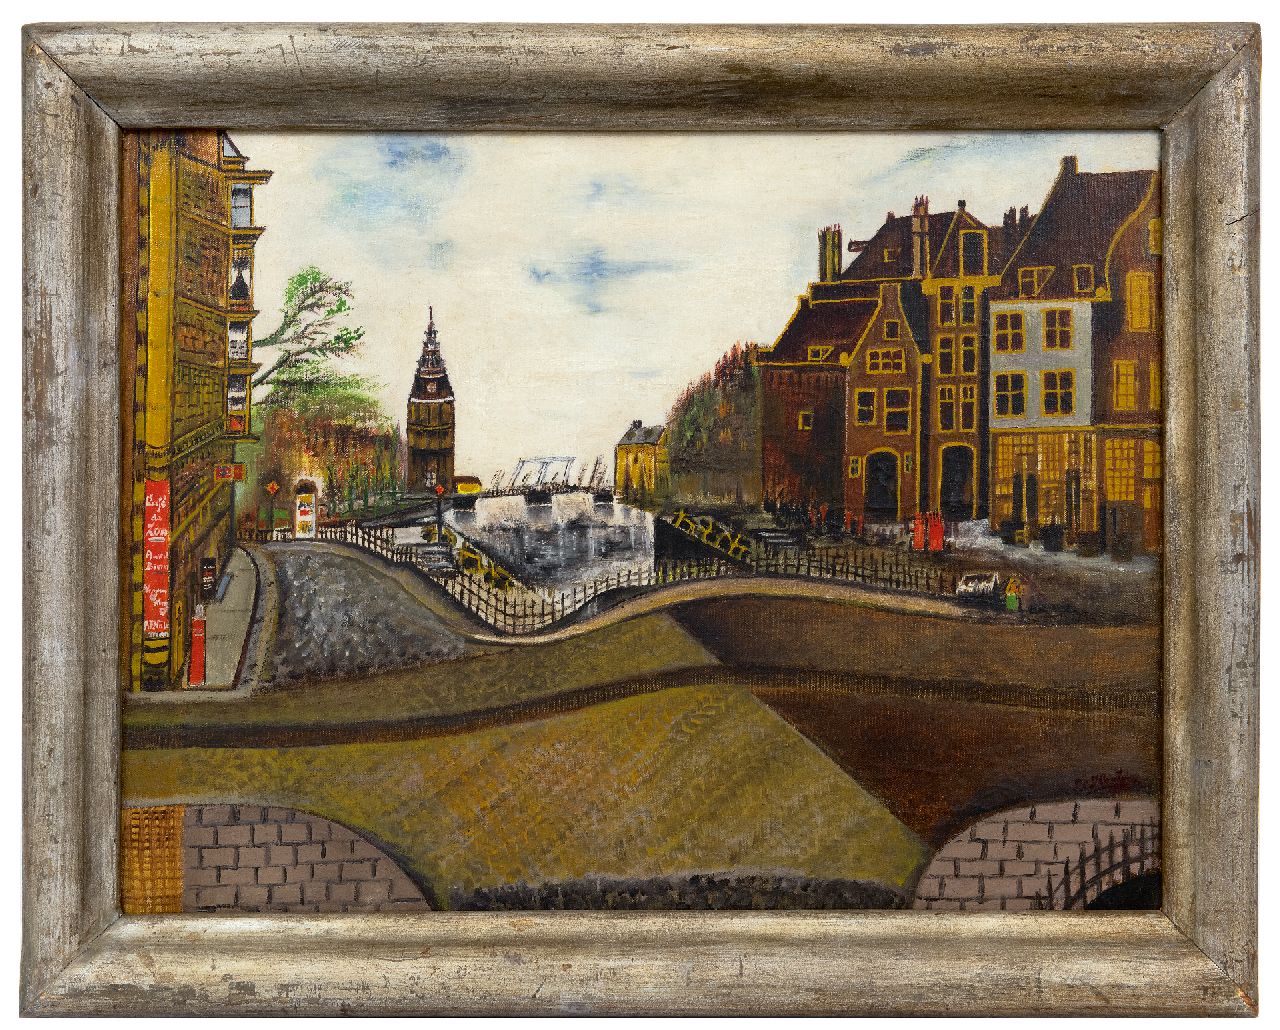 Houtman S.C.  | Sipke Cornelis Houtman | Paintings offered for sale | The Oude Schans, corner St. Antoniebreestraat, with the Montelbaanstoren, Amsterdam, oil on canvas 47.5 x 62.0 cm, signed l.r. and painted 1939